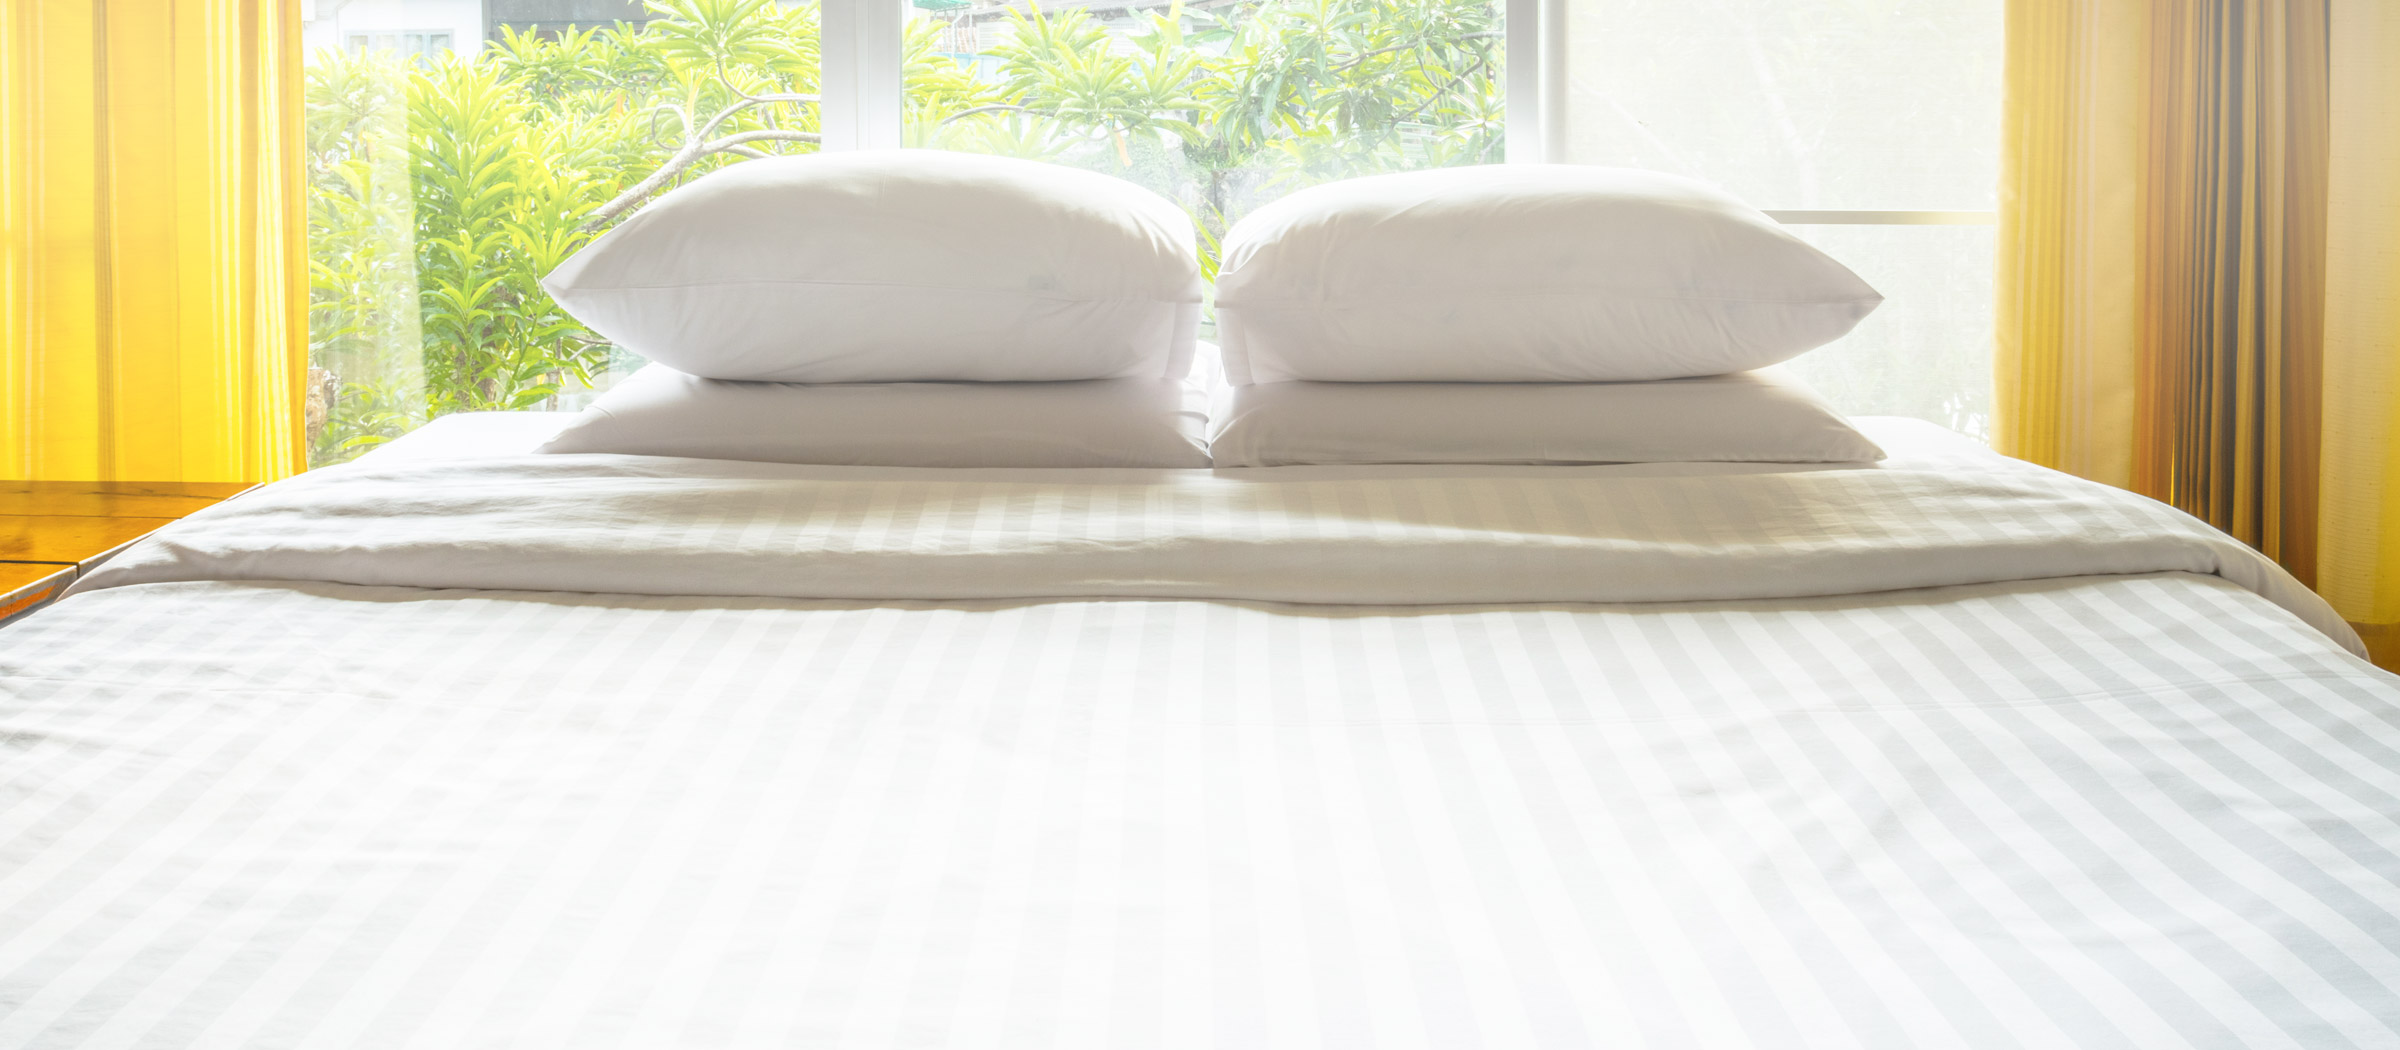 Clean bedsheets and pillows before an outdoors-facing window